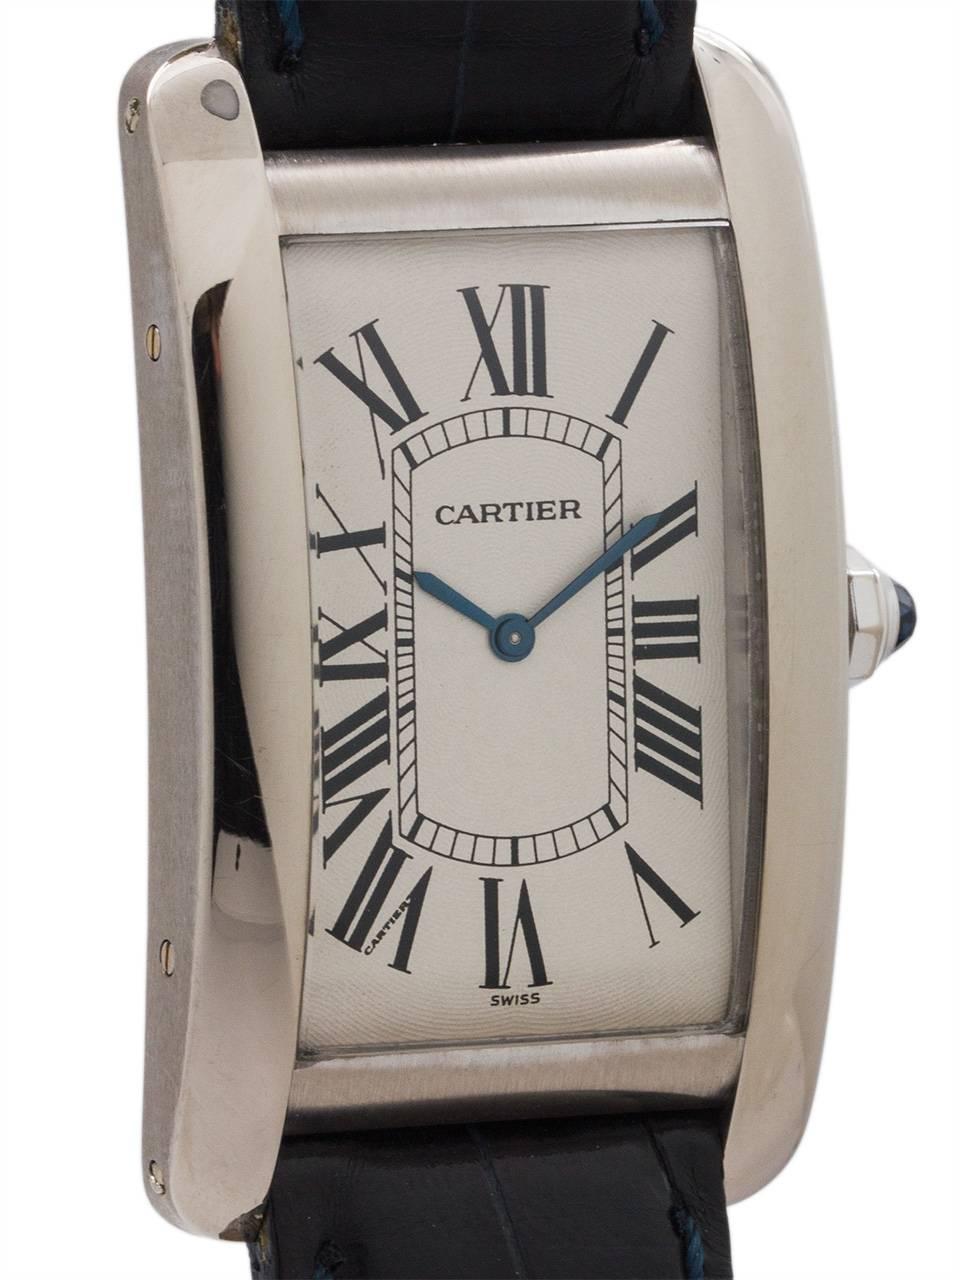 
Man’s large size Cartier Tank American (Americaine) 18K WG circa 1990’s. Featuring oversize 28 x 46mm case with wide polished bezel, curved sapphire crystal, original antique white dial with classic oversize Roman numerals, and powered by 17 jewel